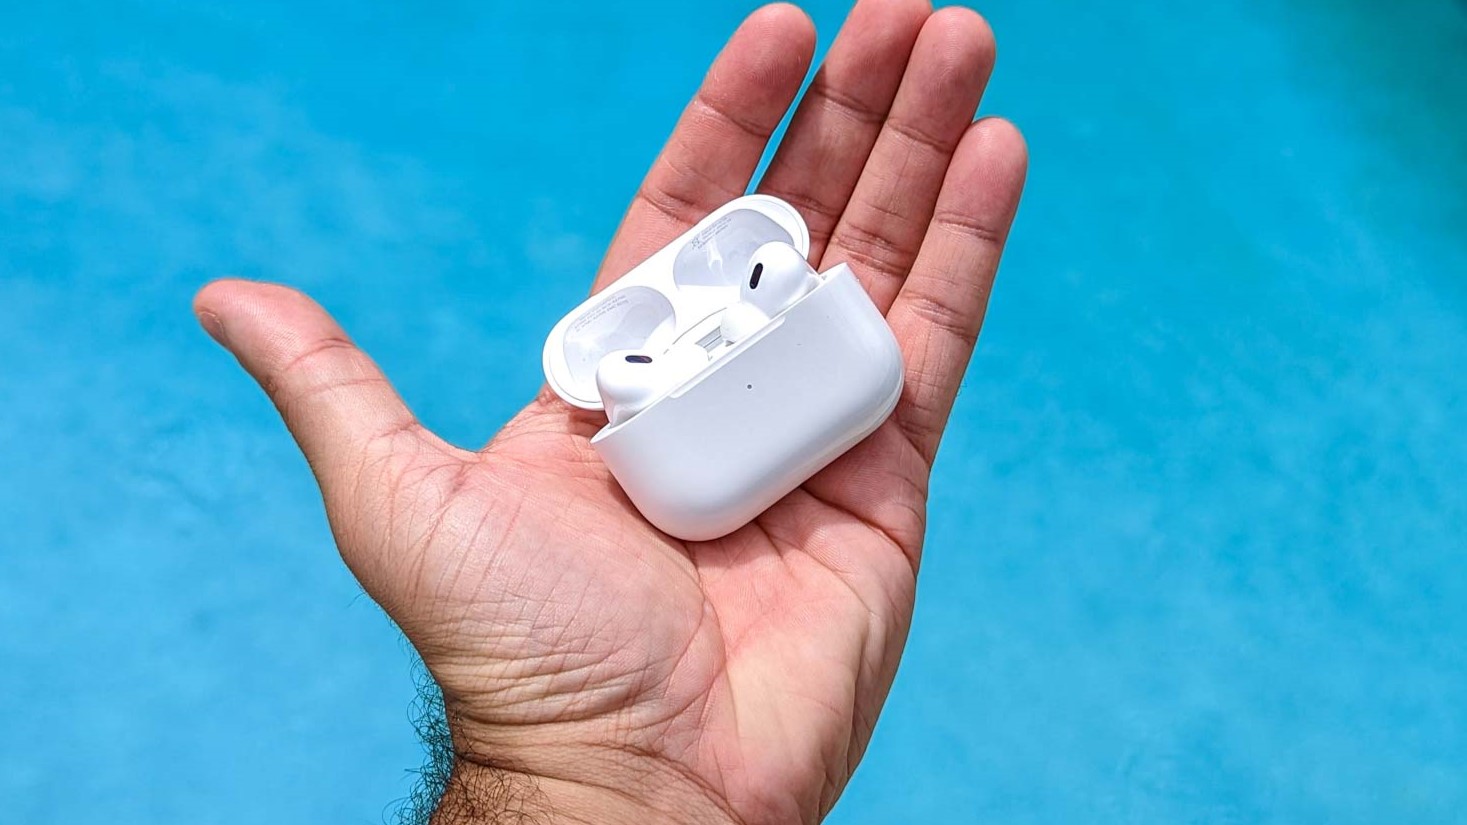 Apple AirPods Pro 2nd Gen USB-C Review: New Port and Adaptive